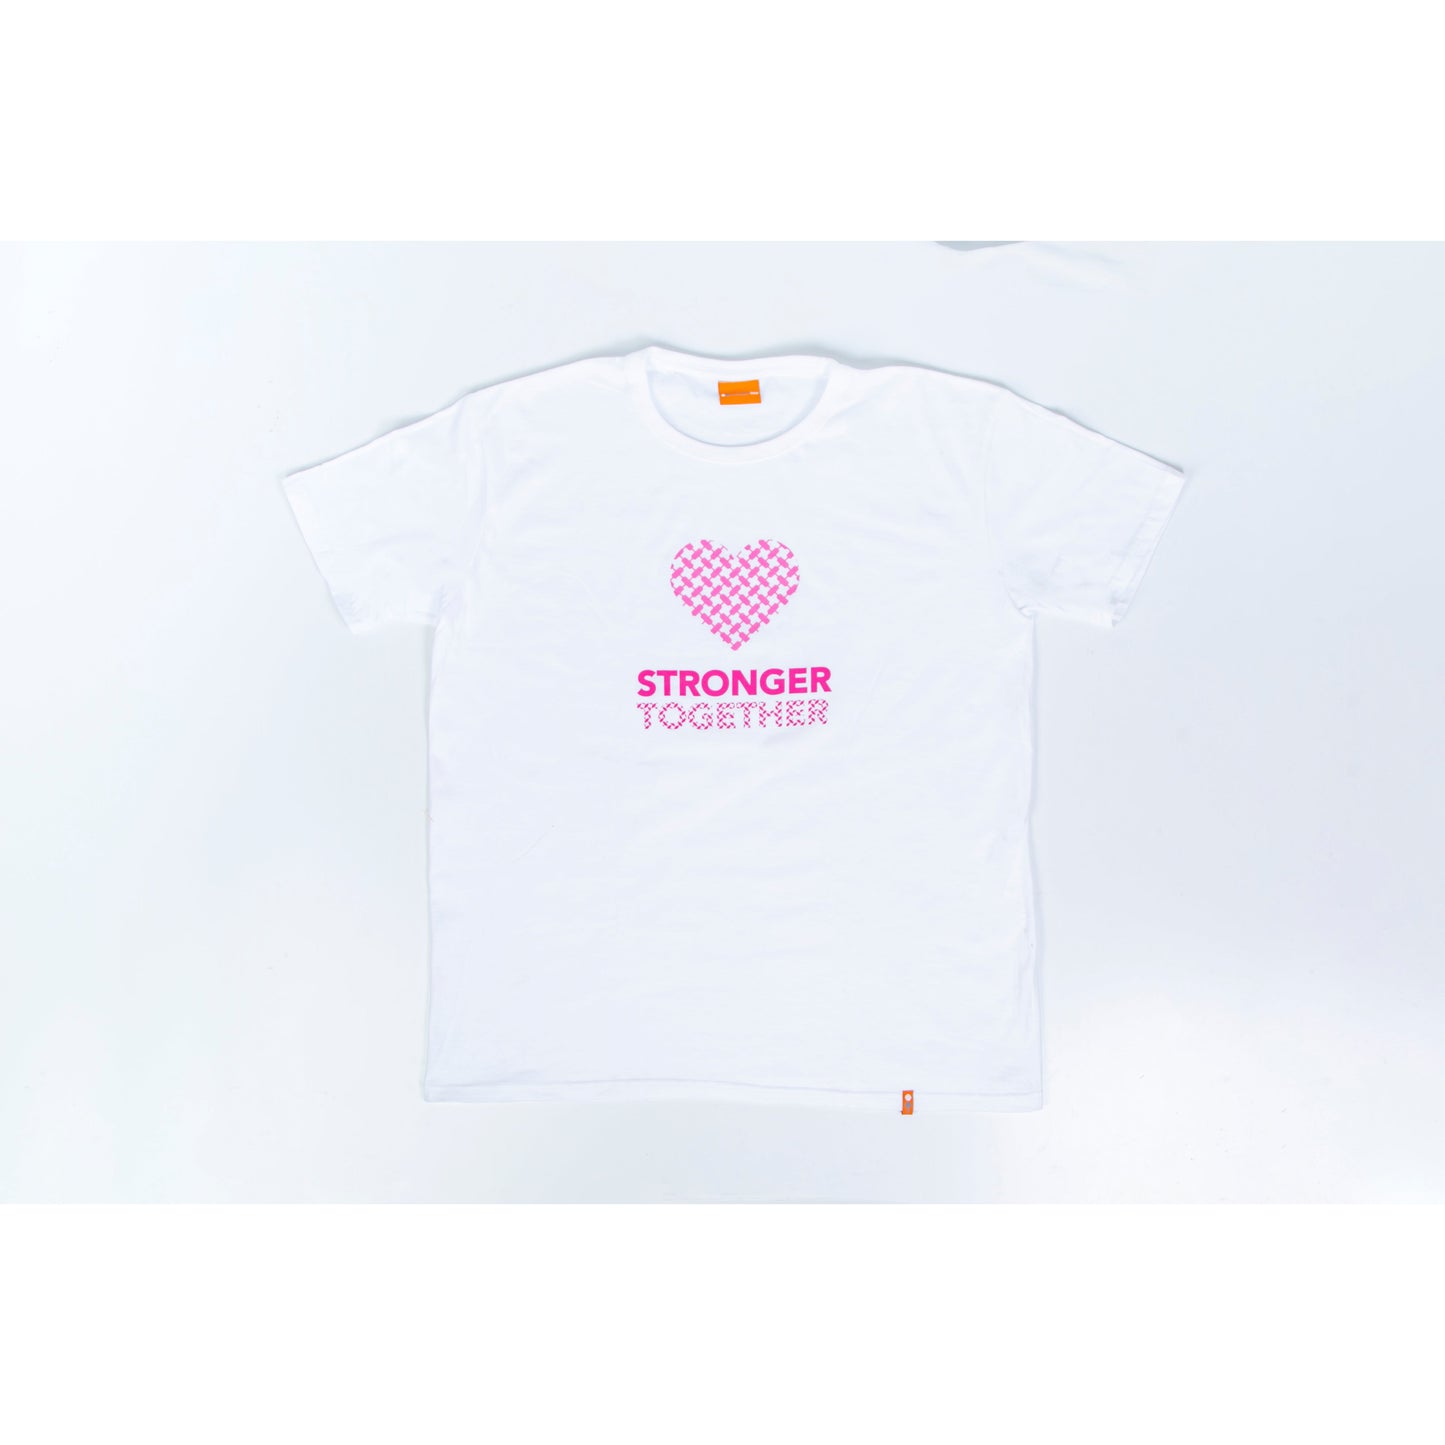 T-shirt in pink color - Stronger together - Breast cancer